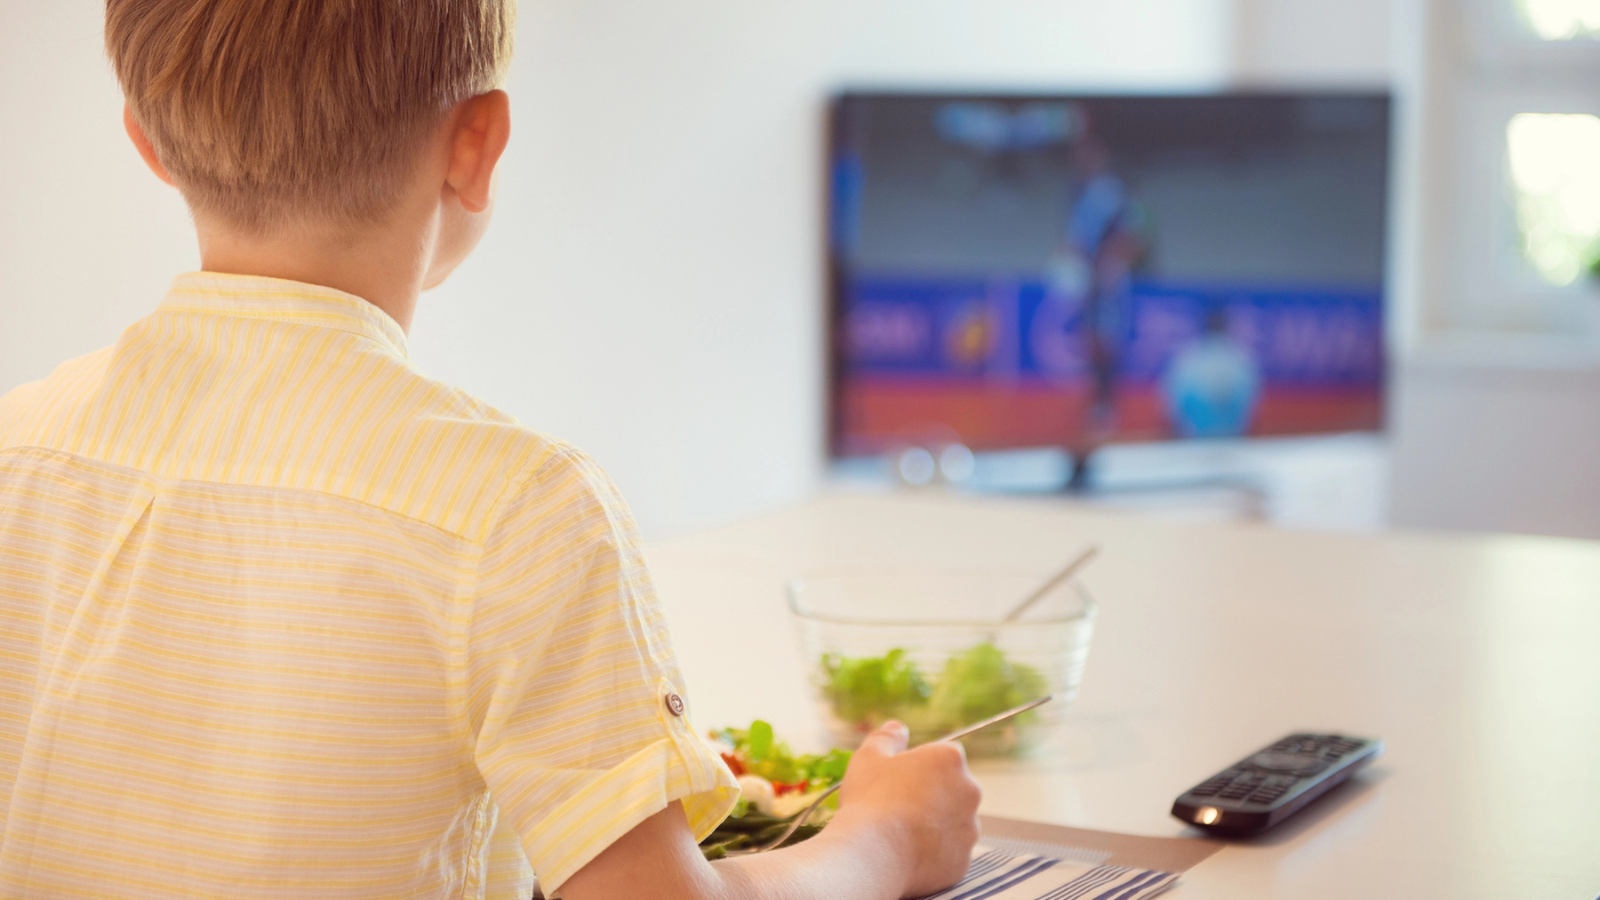 Boy eating in front of the tv